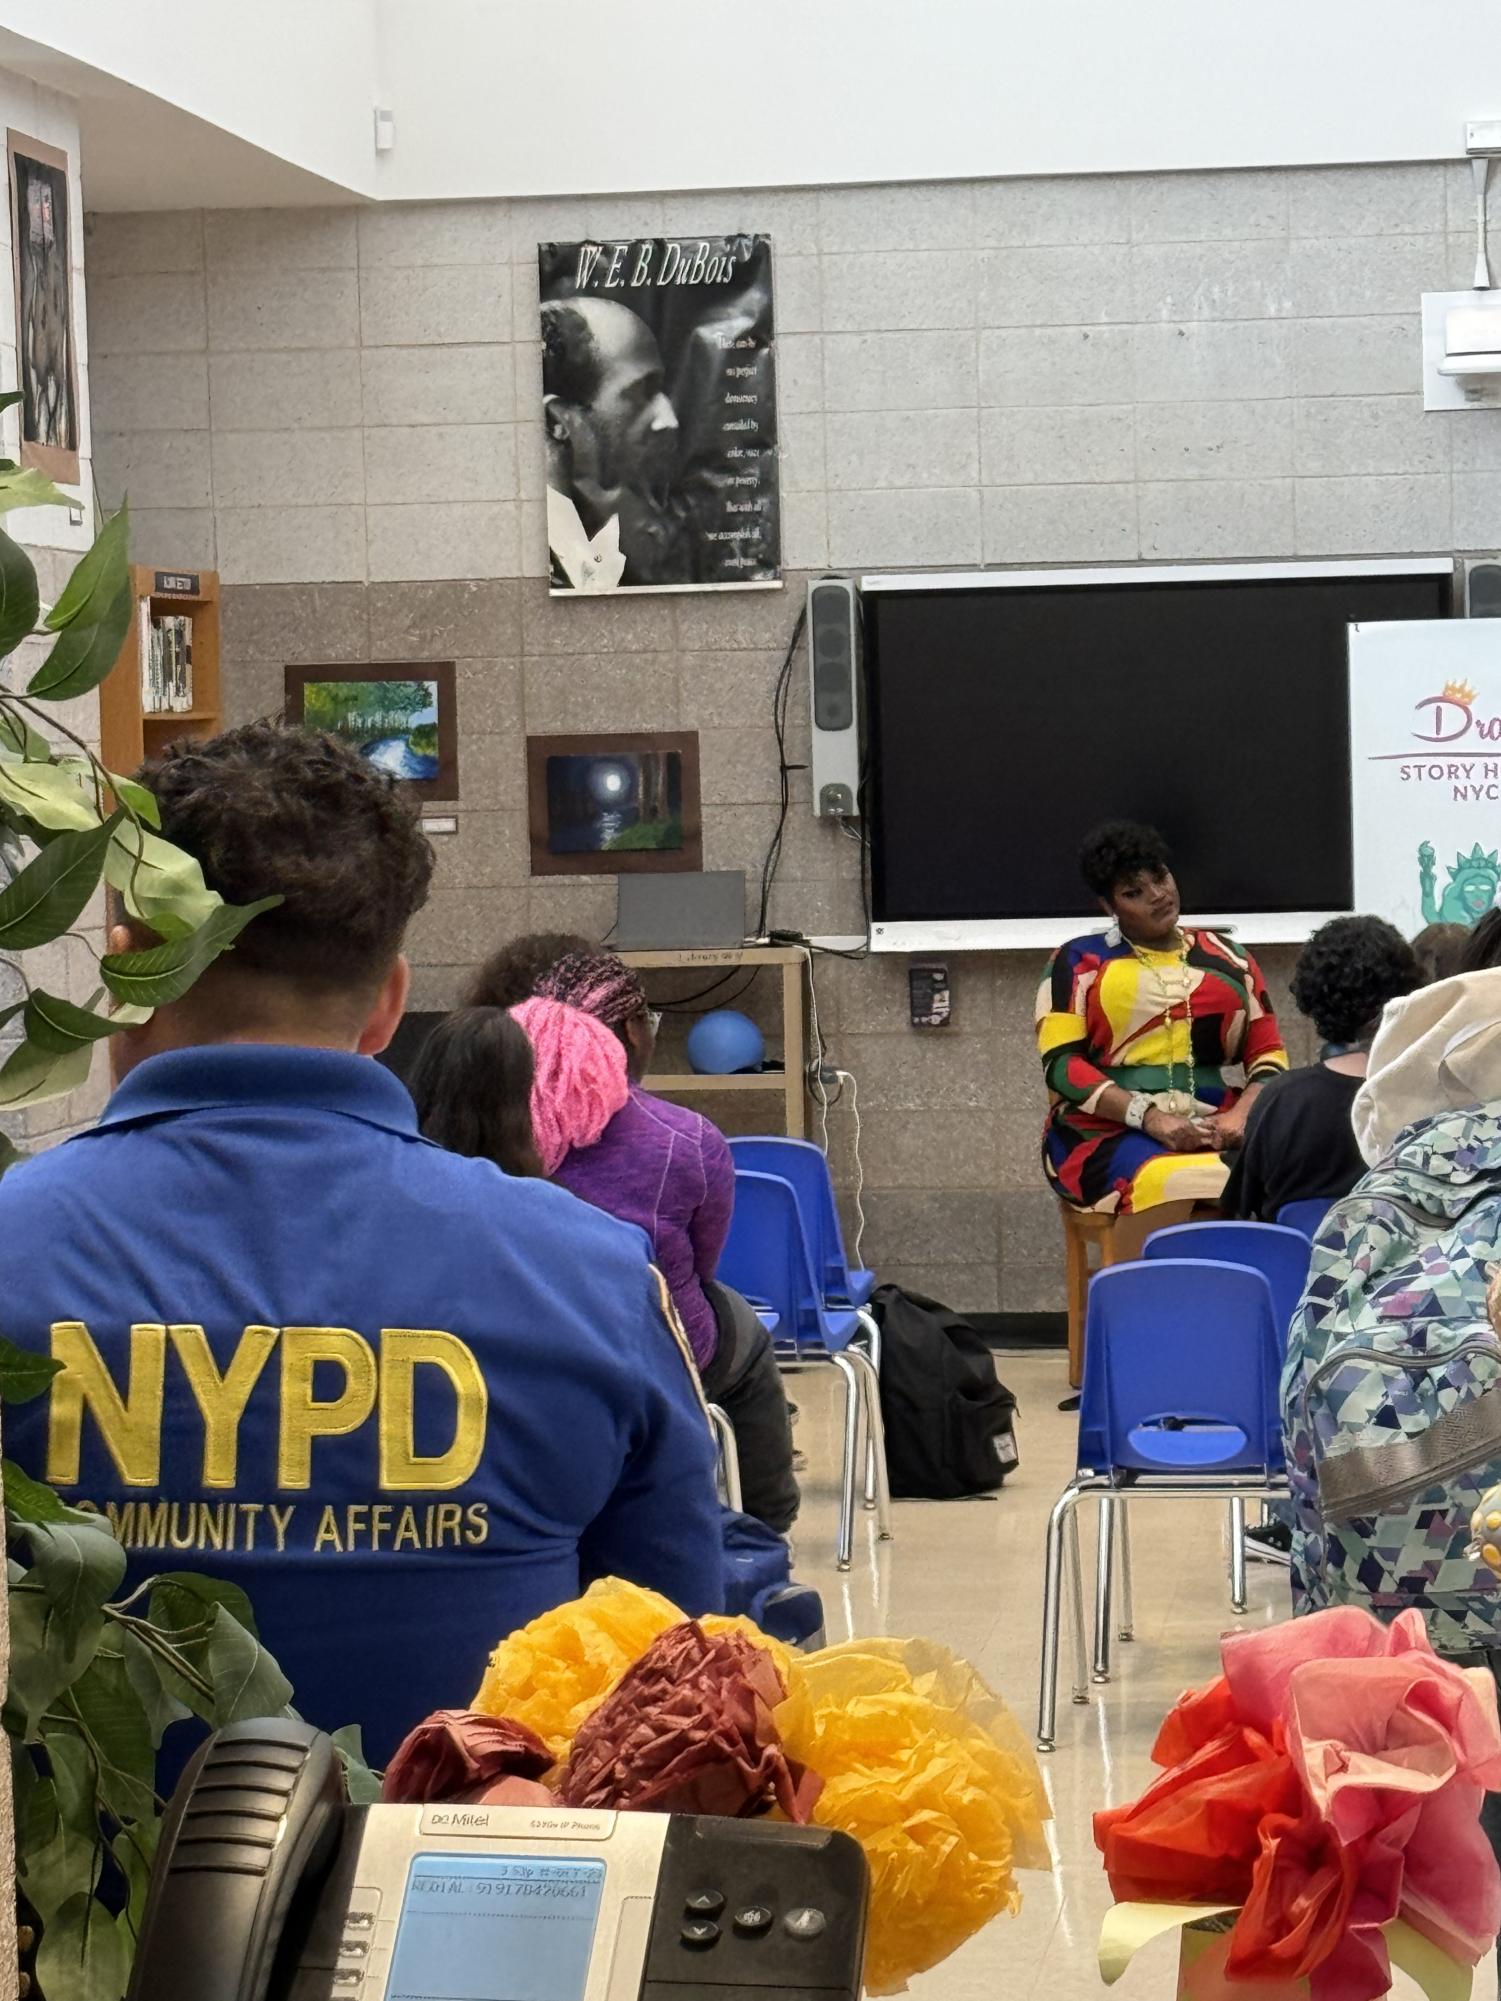 NYPD Community Affairs monitors Drag Story Hour Event at THHS after reports of a potential protest